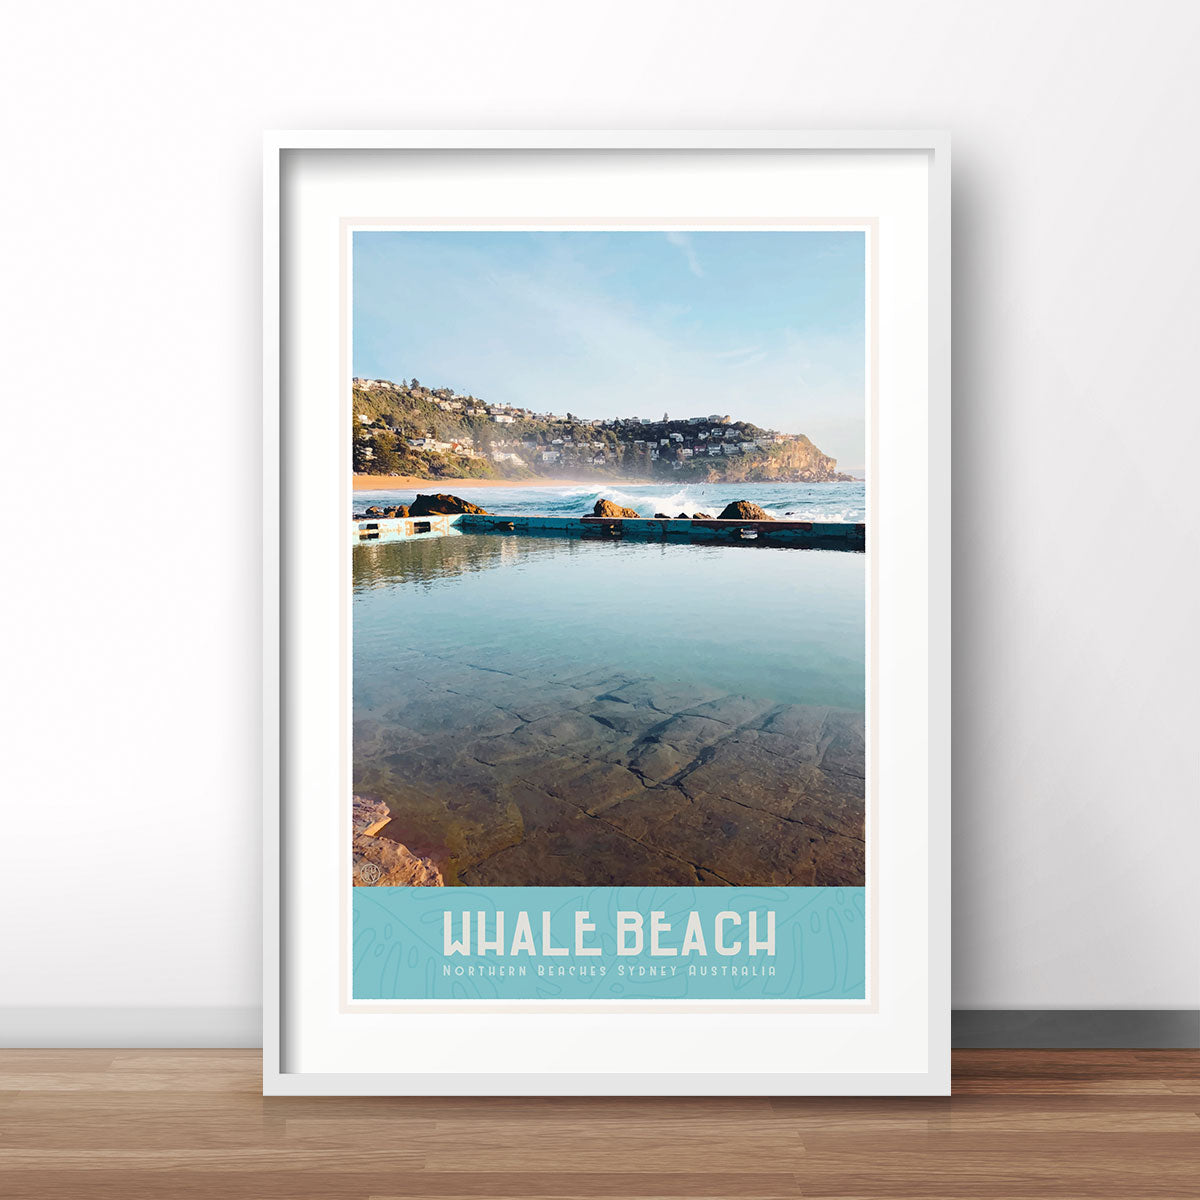 Whale Beach NSW vintage style travel print - Places we luv